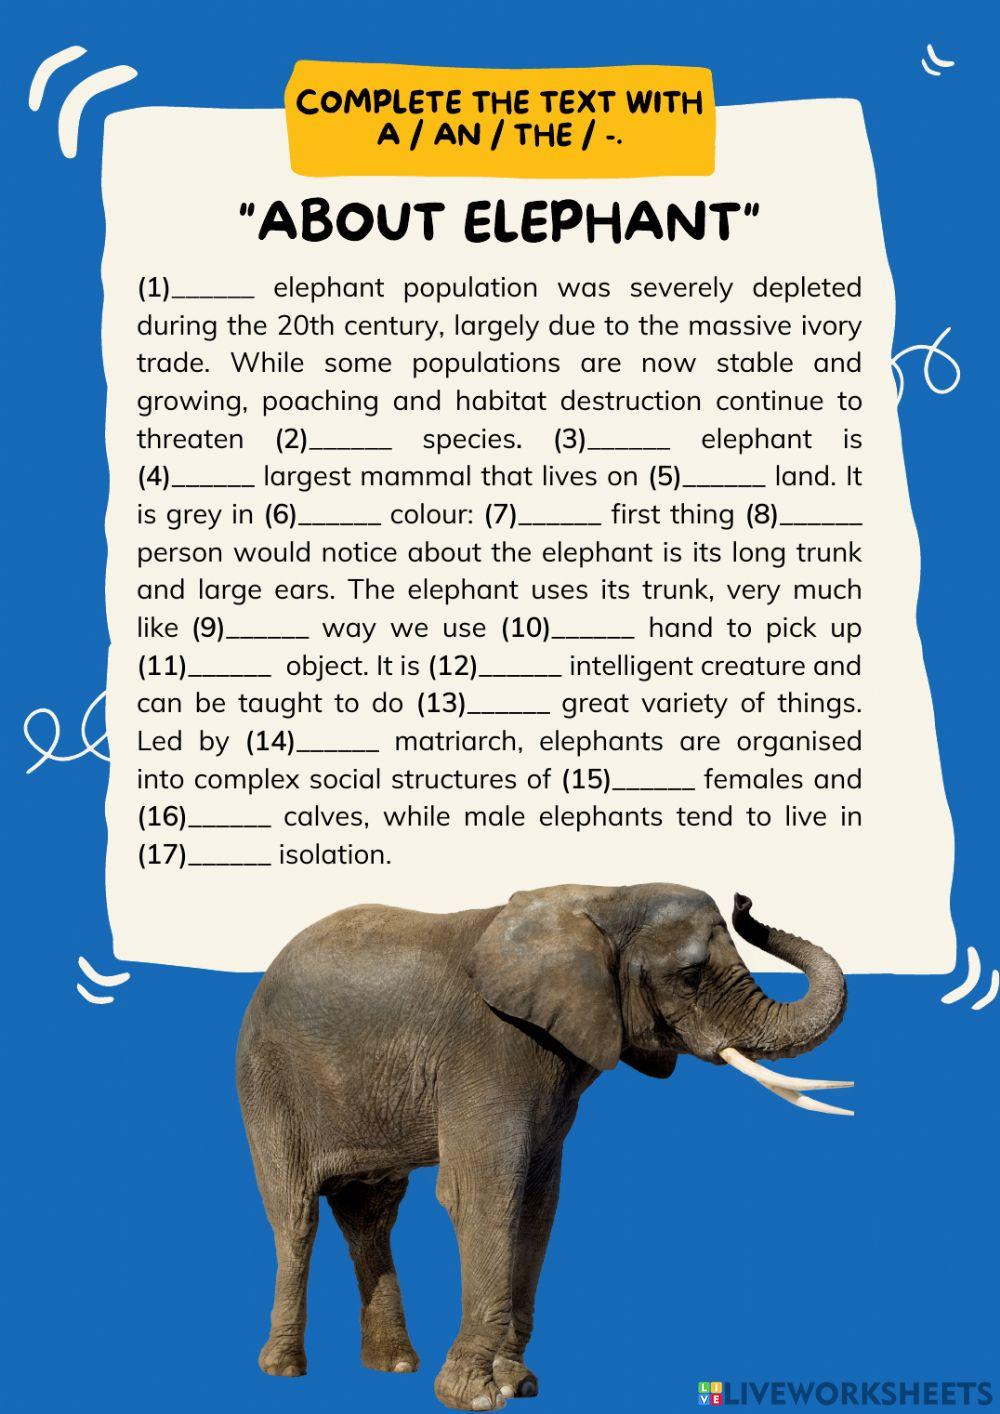 About Elephant